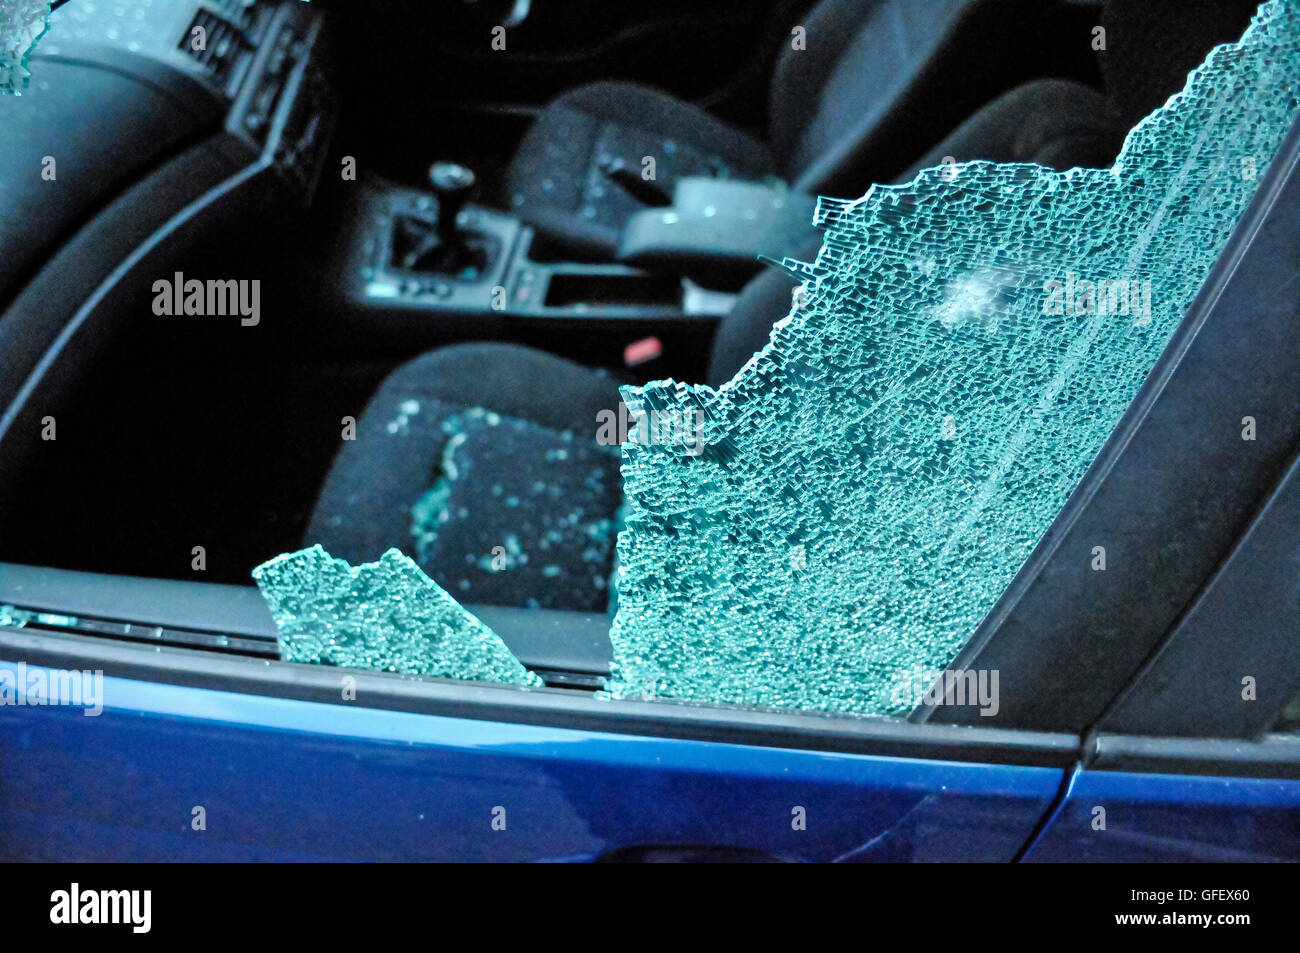 Belfast, Northern Ireland. 9th August 2013 - A blue car has its windows smashed Stock Photo